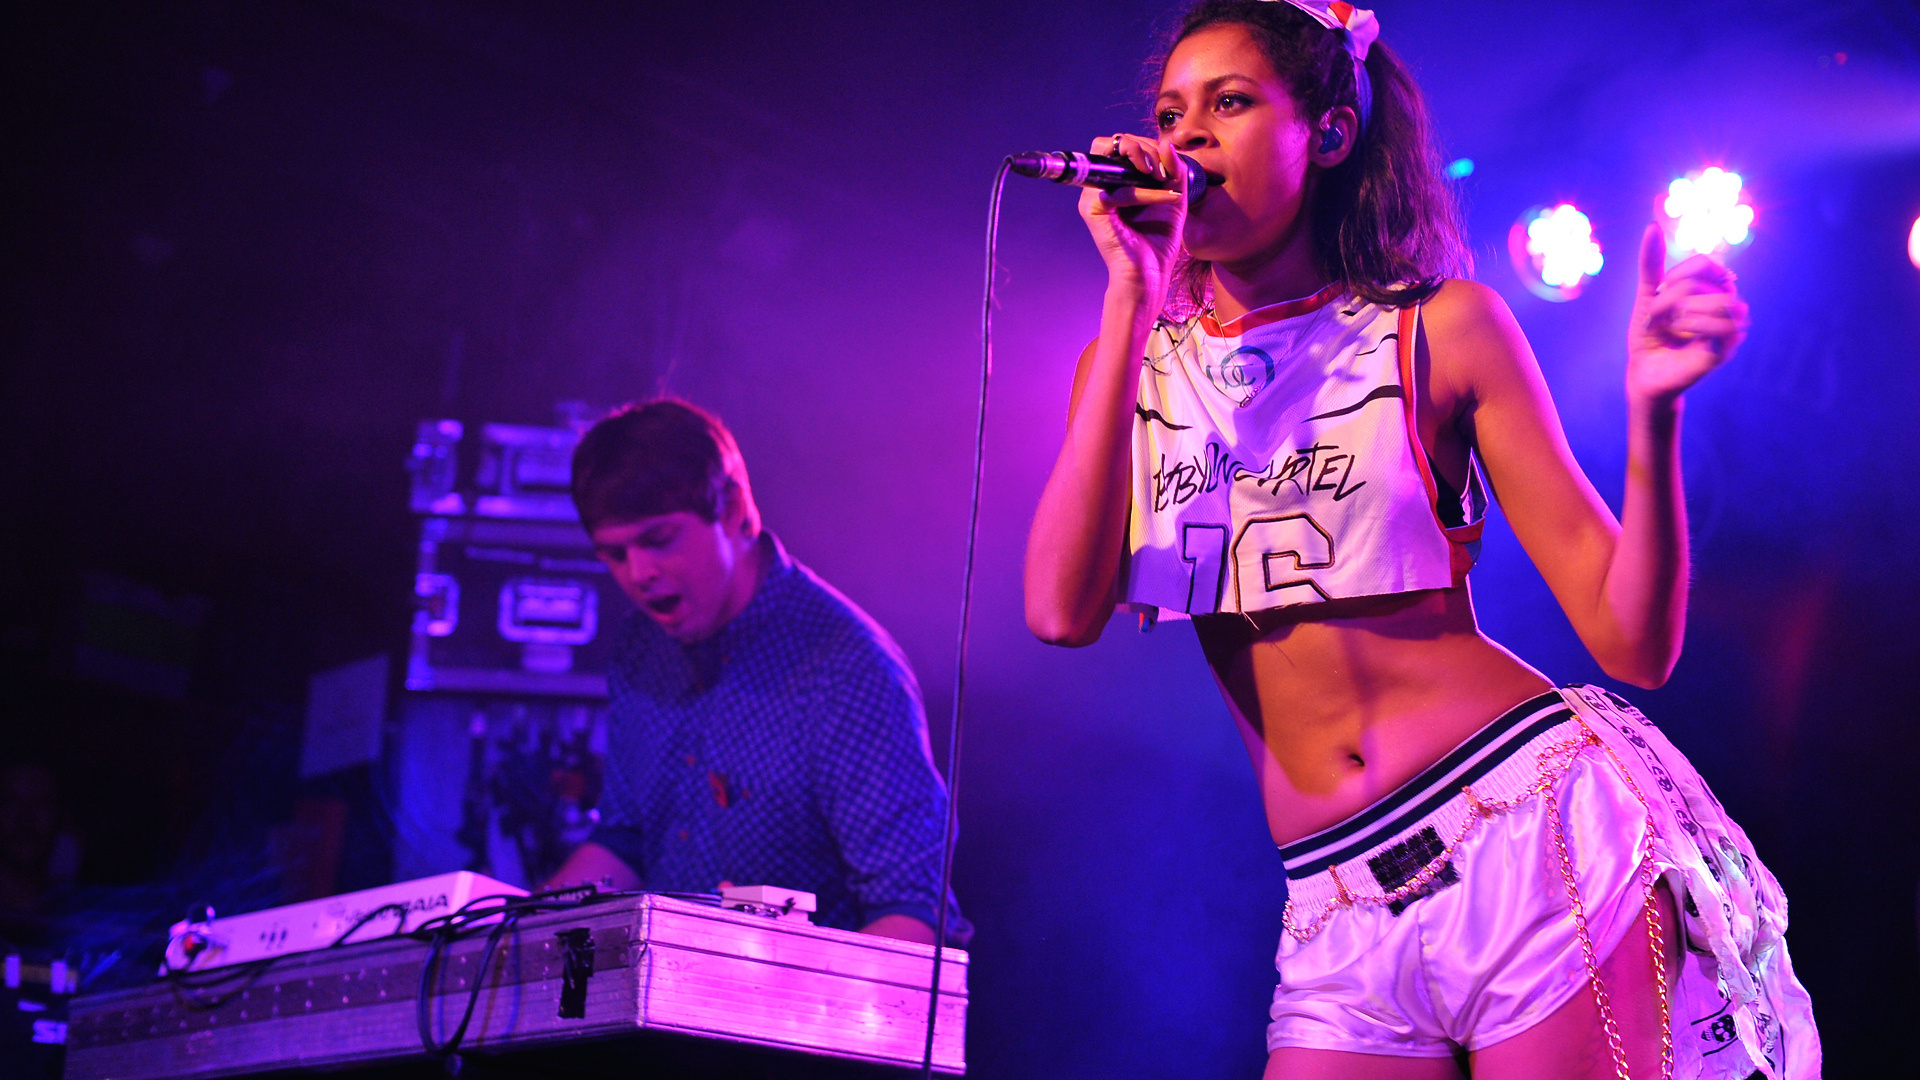 Alunageorge Hd Wallpaper posted by Ryan Anderson 1920x1080